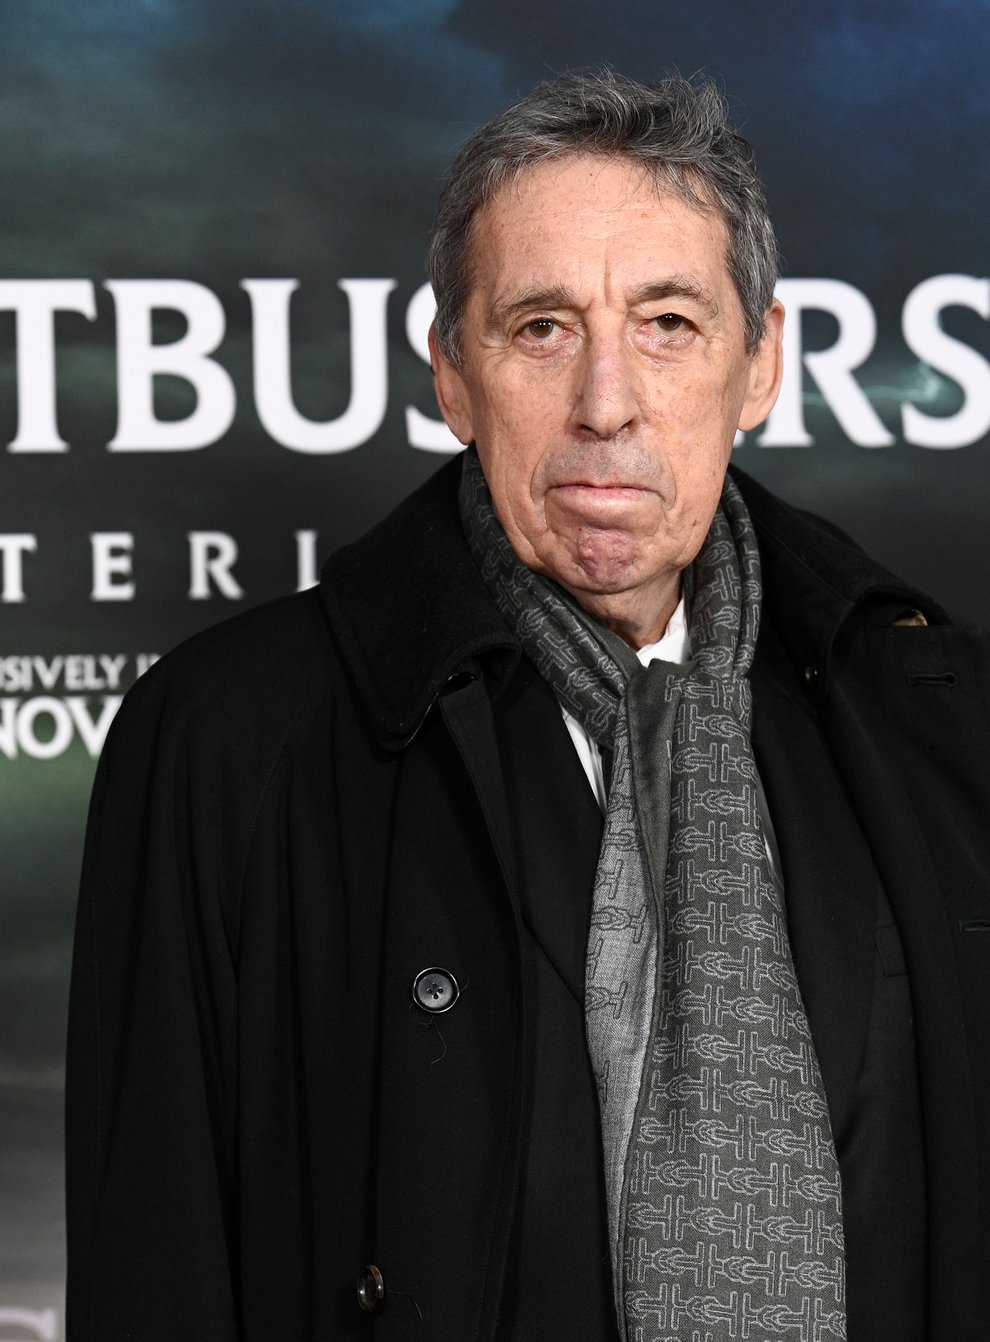 Ivan Reitman at the premiere of Ghostbusters: Afterlife (Evan Agostini/Invision/AP)